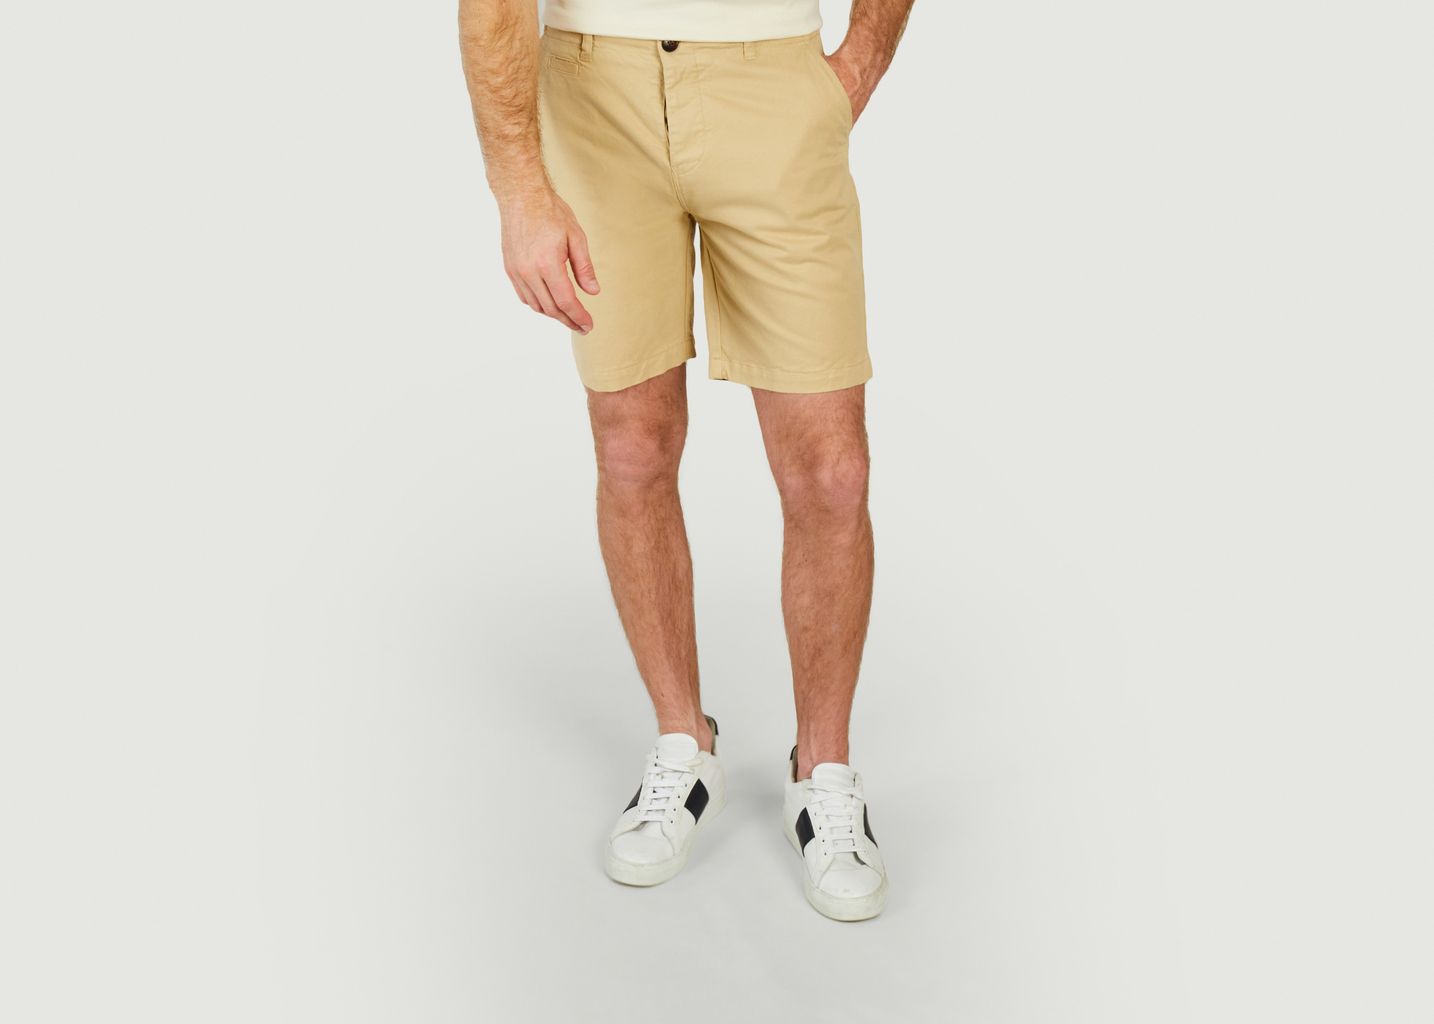 Cuisse de Grenouille Chino Shorts